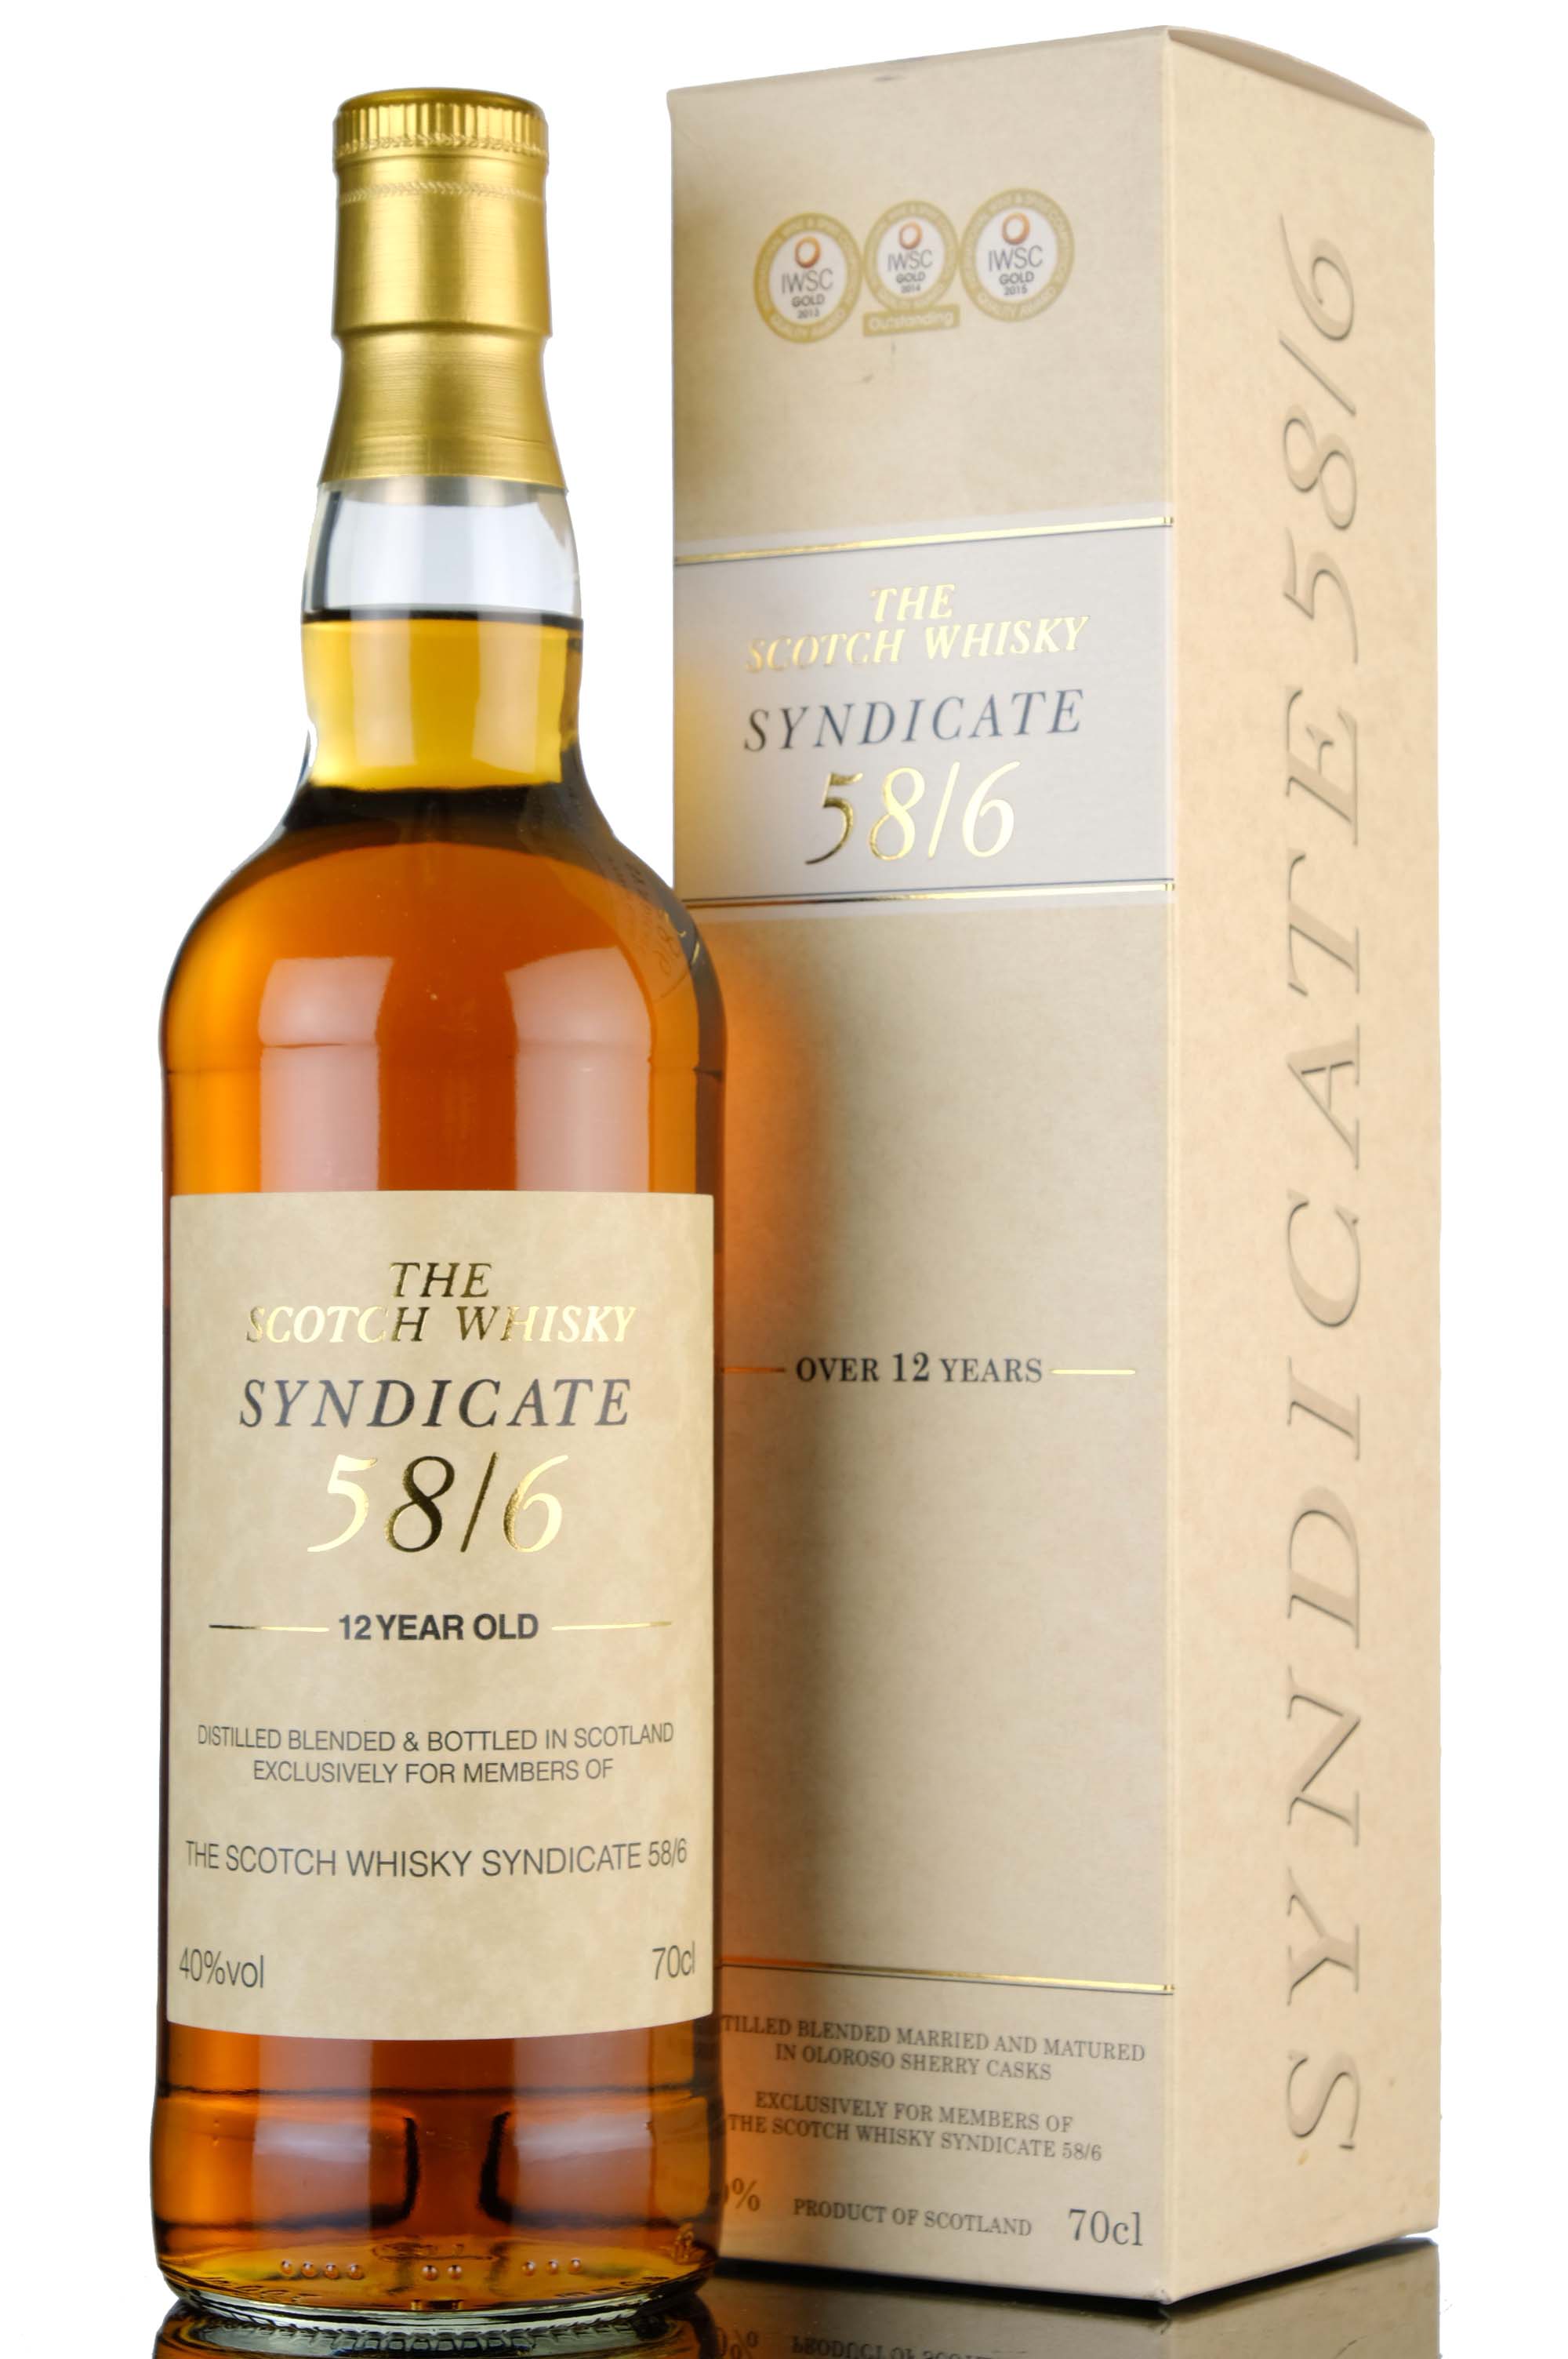 The Scotch Whisky Syndicate 58/6 12 Year Old - Oloroso Sherry Cask